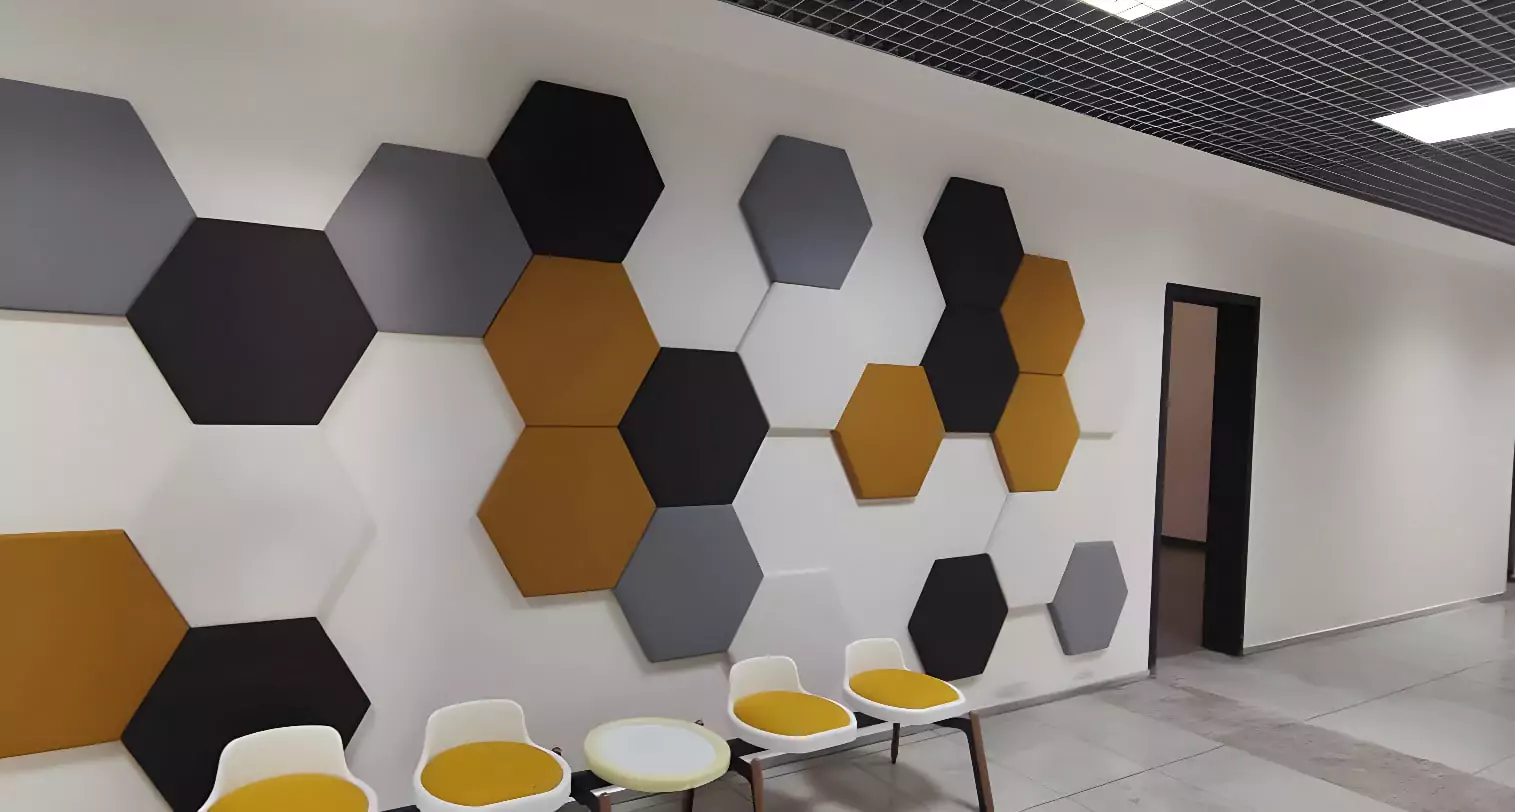 Acoustic Panel Projects